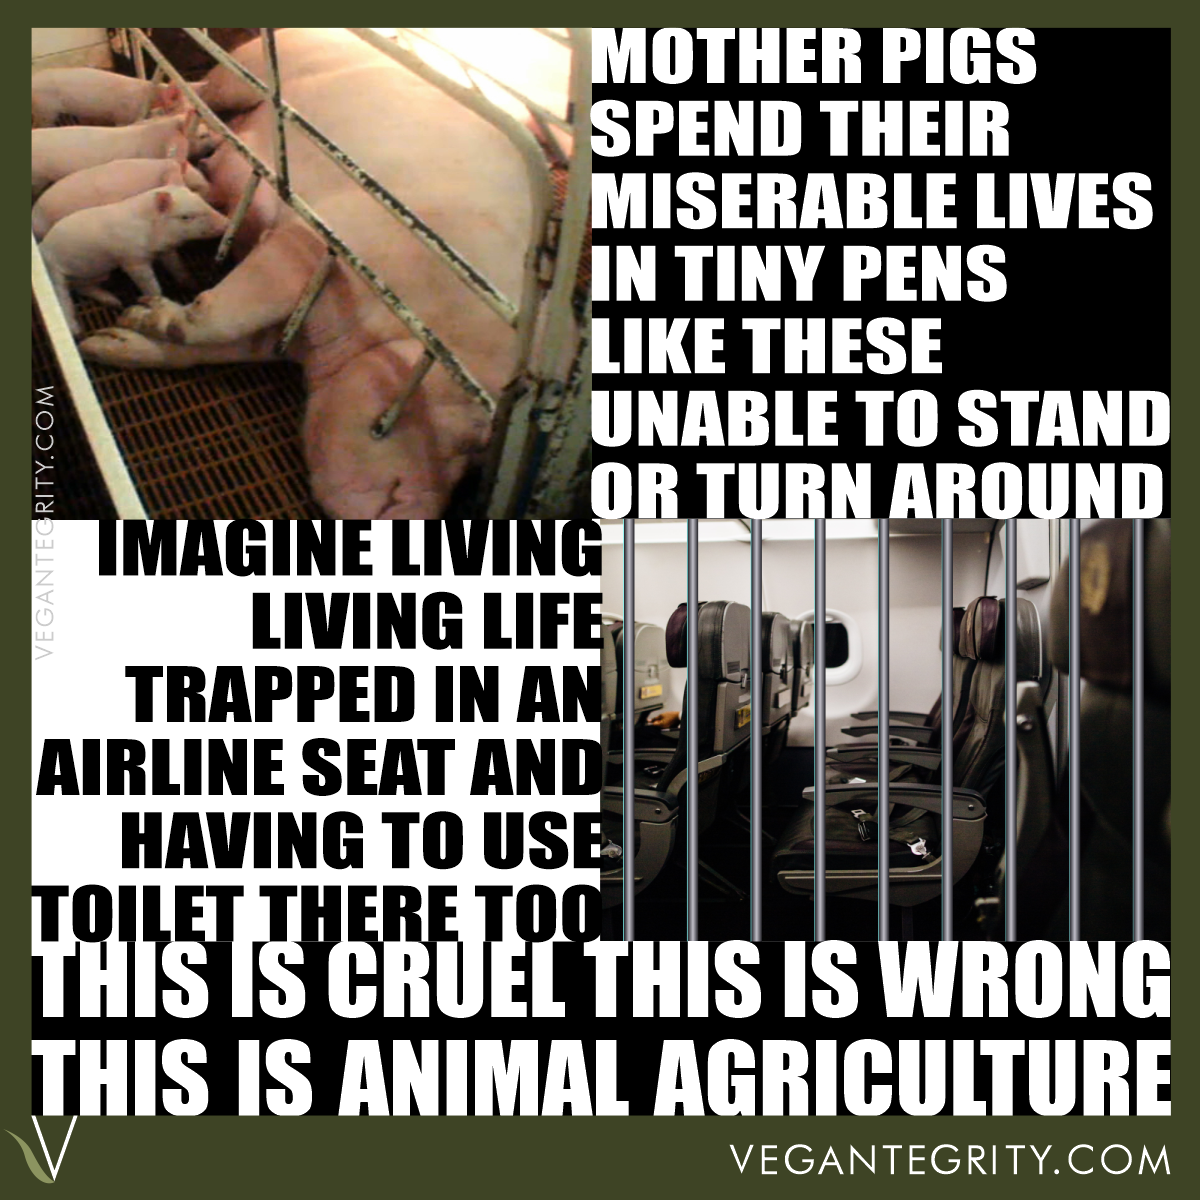 Mother pigs spend their lives in tiny pens like these unable to stand or turn around. Imagine living life trapped in an airline seat and having to use the toilet there too. This is cruel. This is wrong. This is animal agriculture. Photo of mother pig lying in a farrowing crate with several piglets suckling from outside the crate bars - photo of empty airline seat superimposed with jail bars